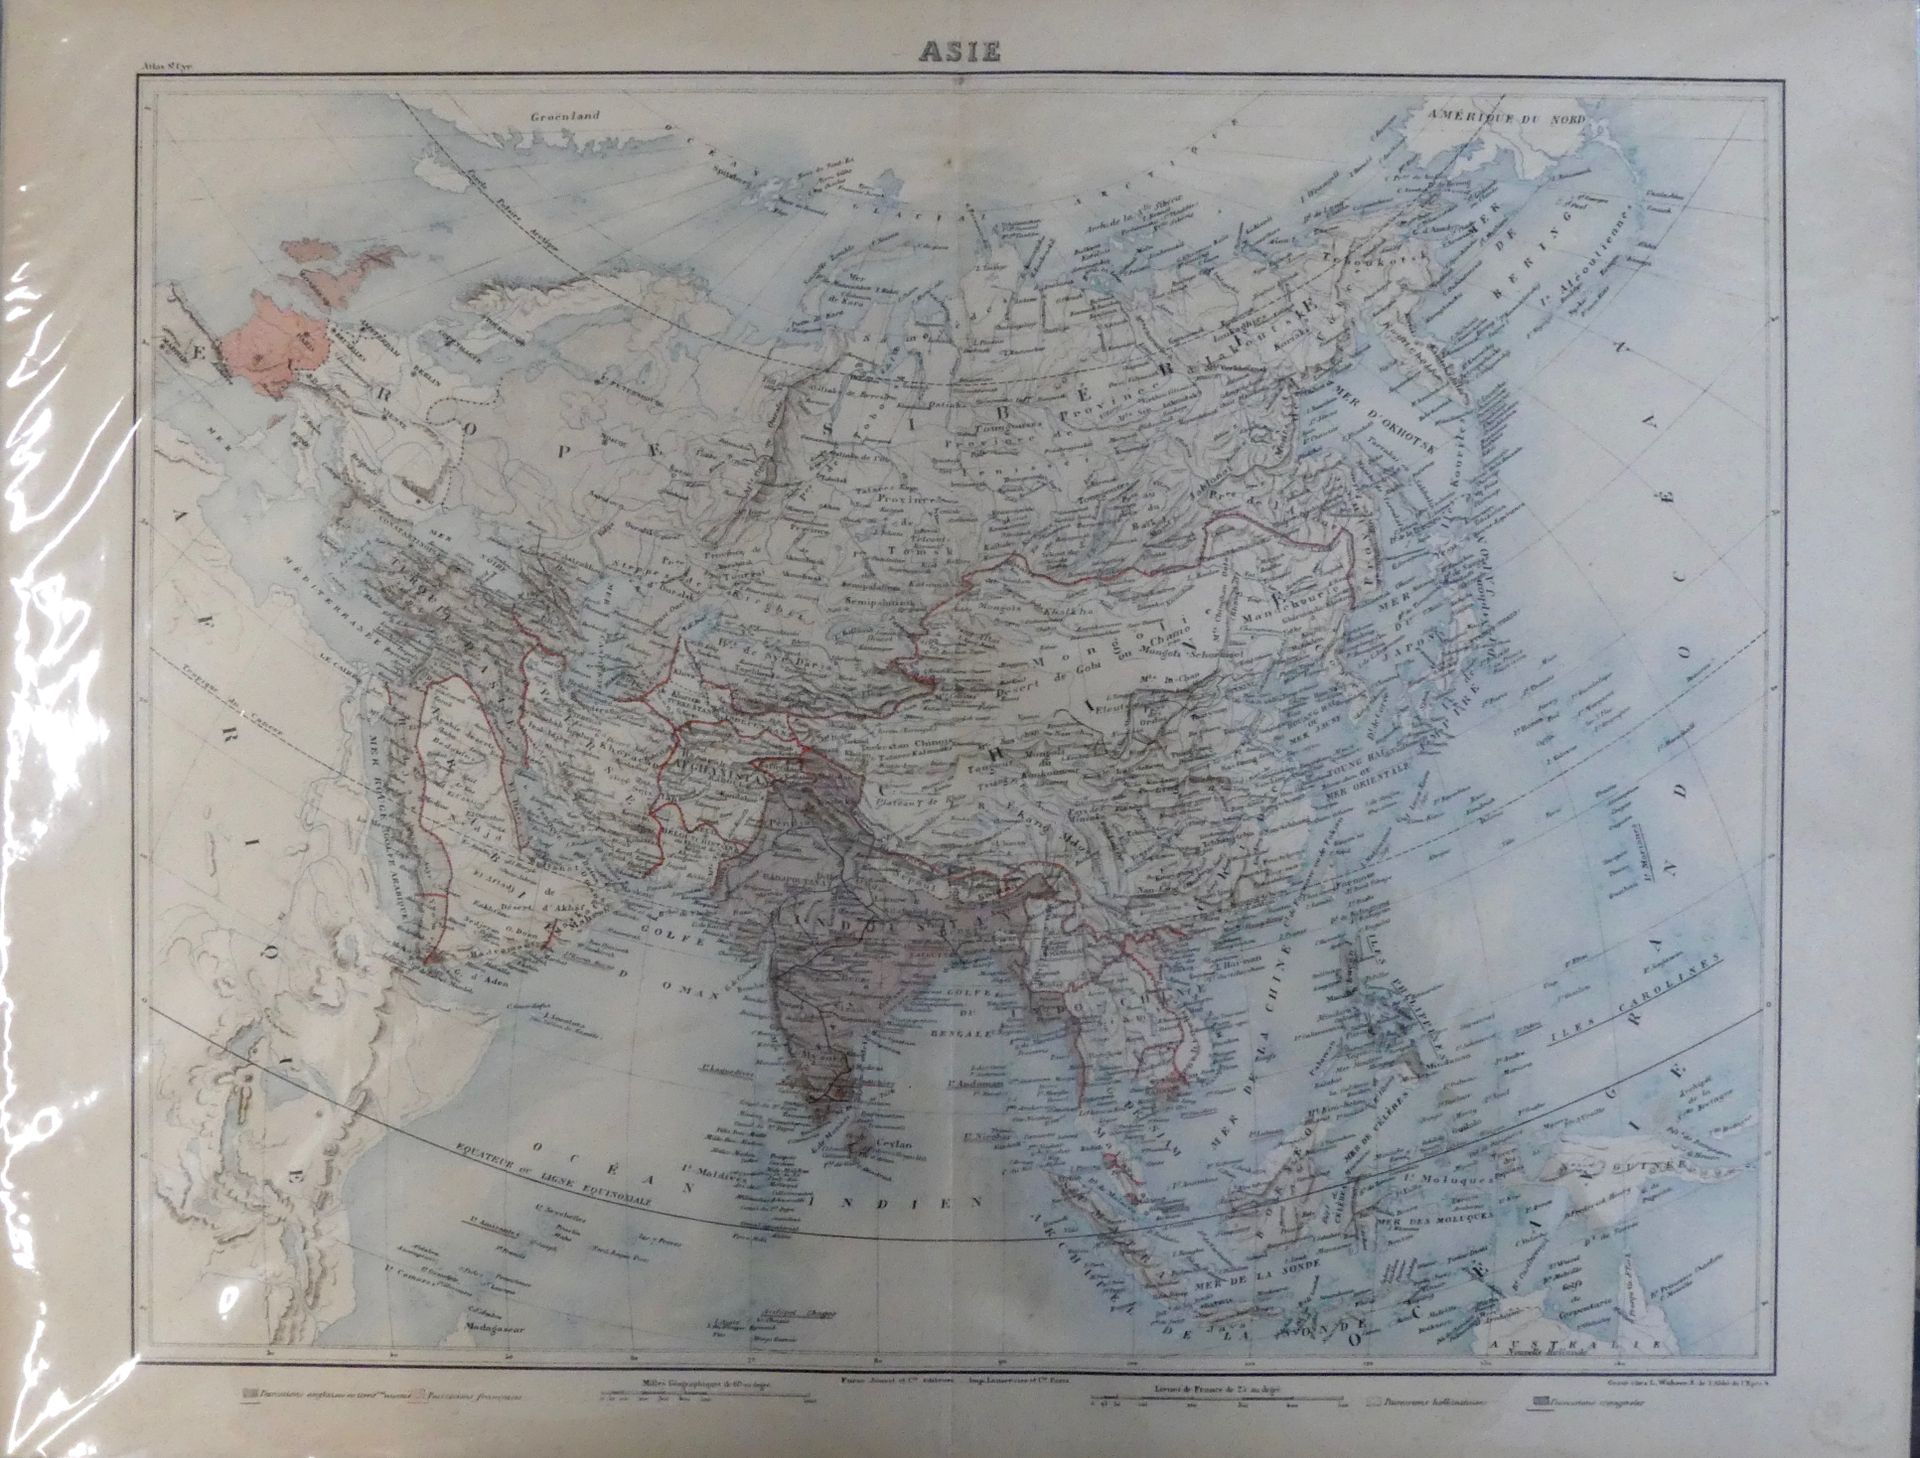 Null Map "Asia". Extract from Atlas Saint-Cyr, Furne, Jouvet et Cie publishers I&hellip;